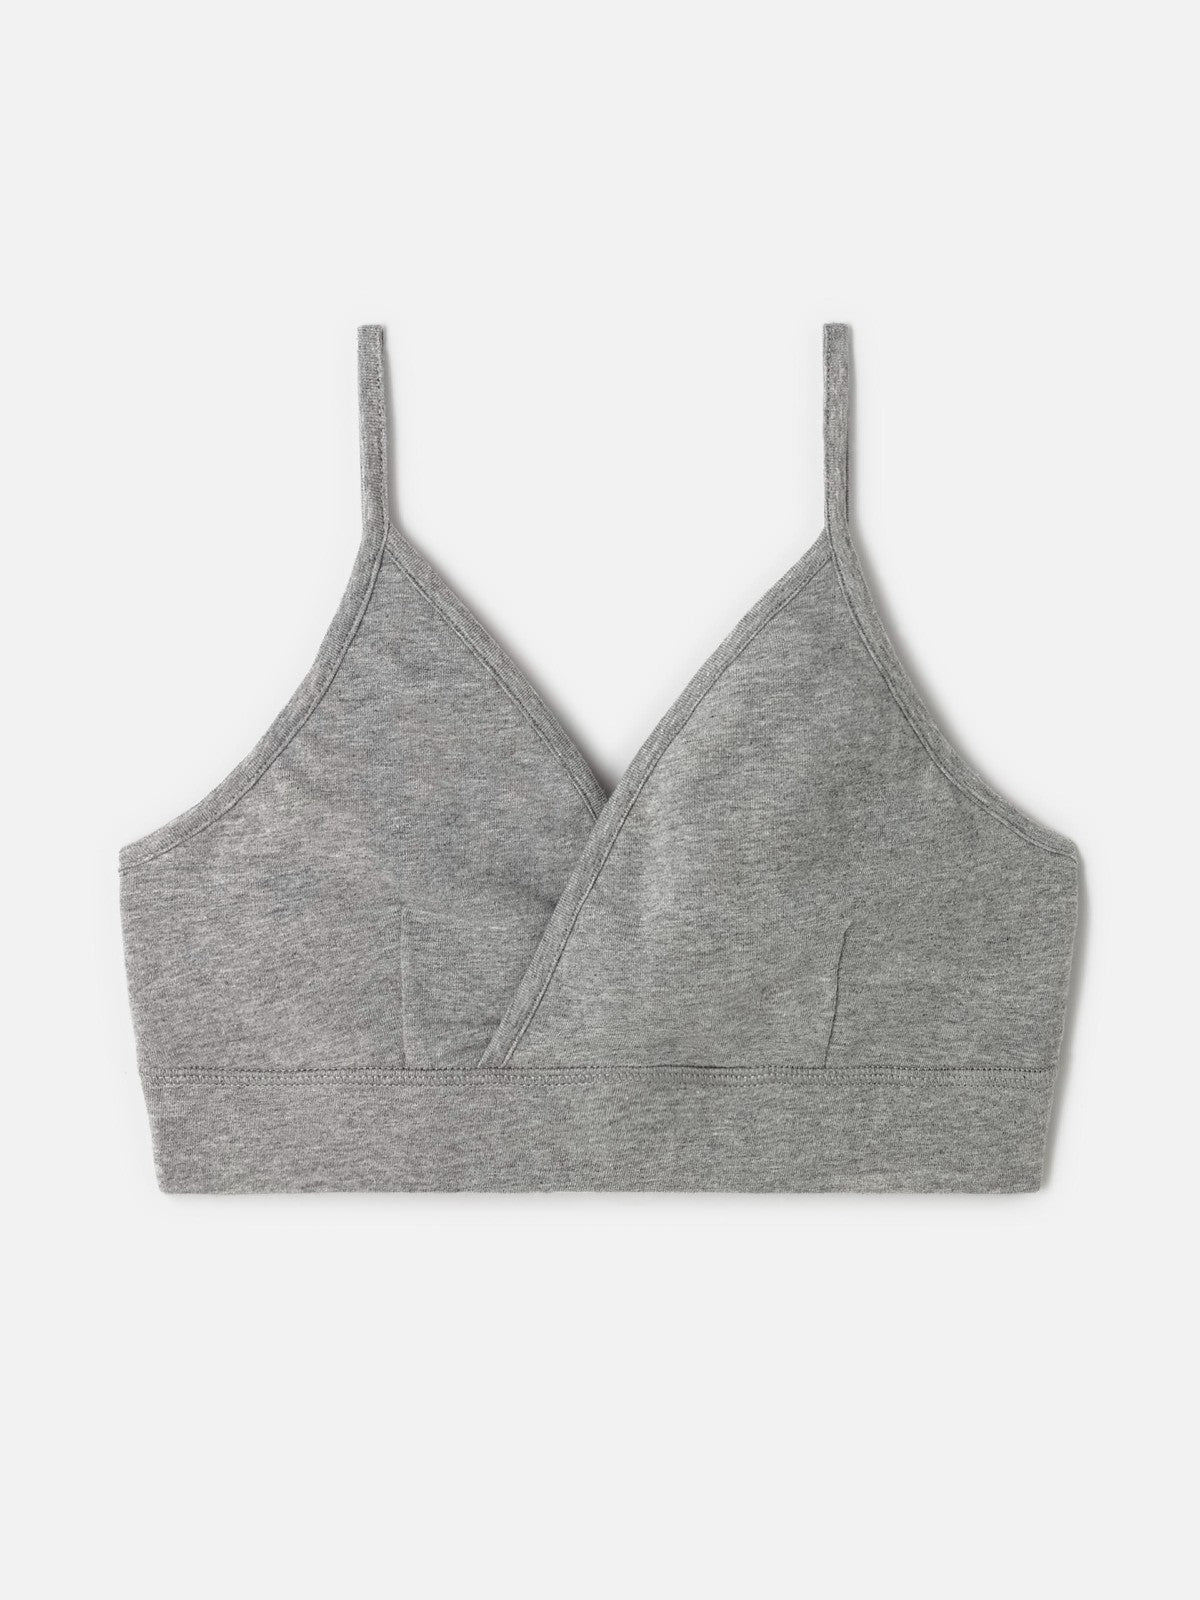 Forever 21 Women's Organically Grown Cotton Triangle Bralette in